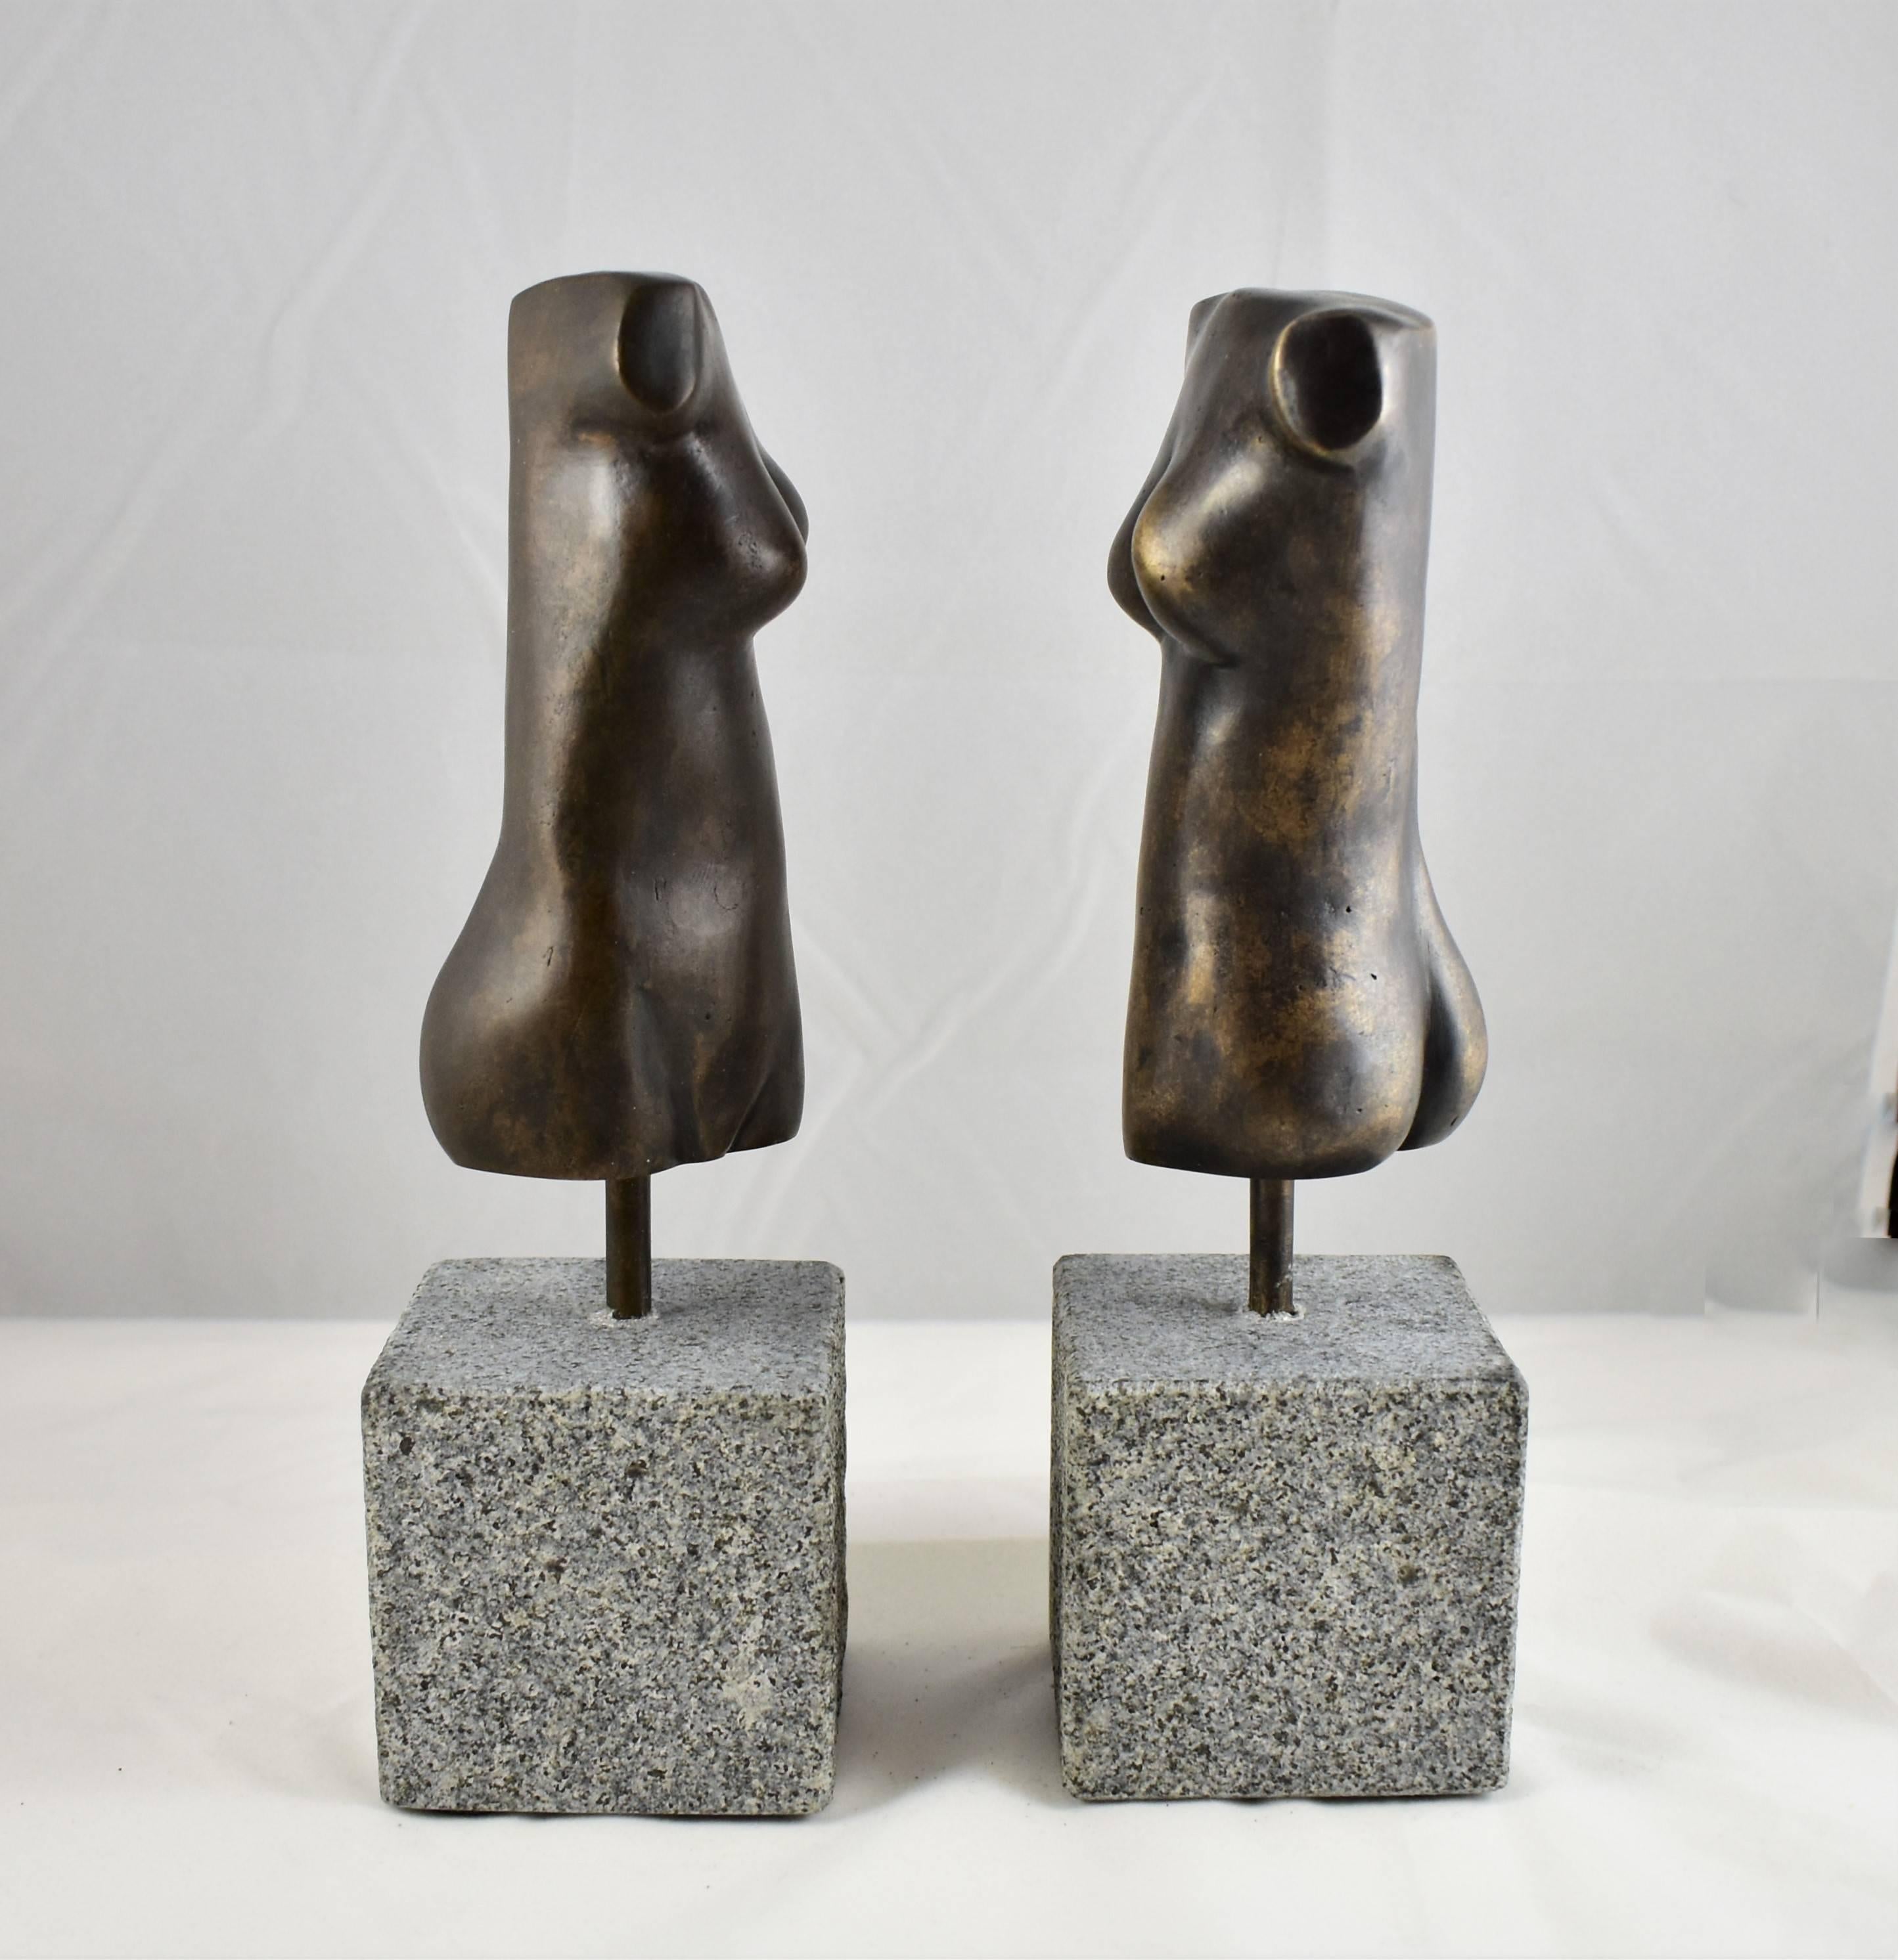 A pair of modern bronze sculptures of a female form/torso one with a black patina finish and the other with a Burnished Brown Patina finish. Hand made by the artist then hand cast. Modernistic and artistic design capturing the essence of the female